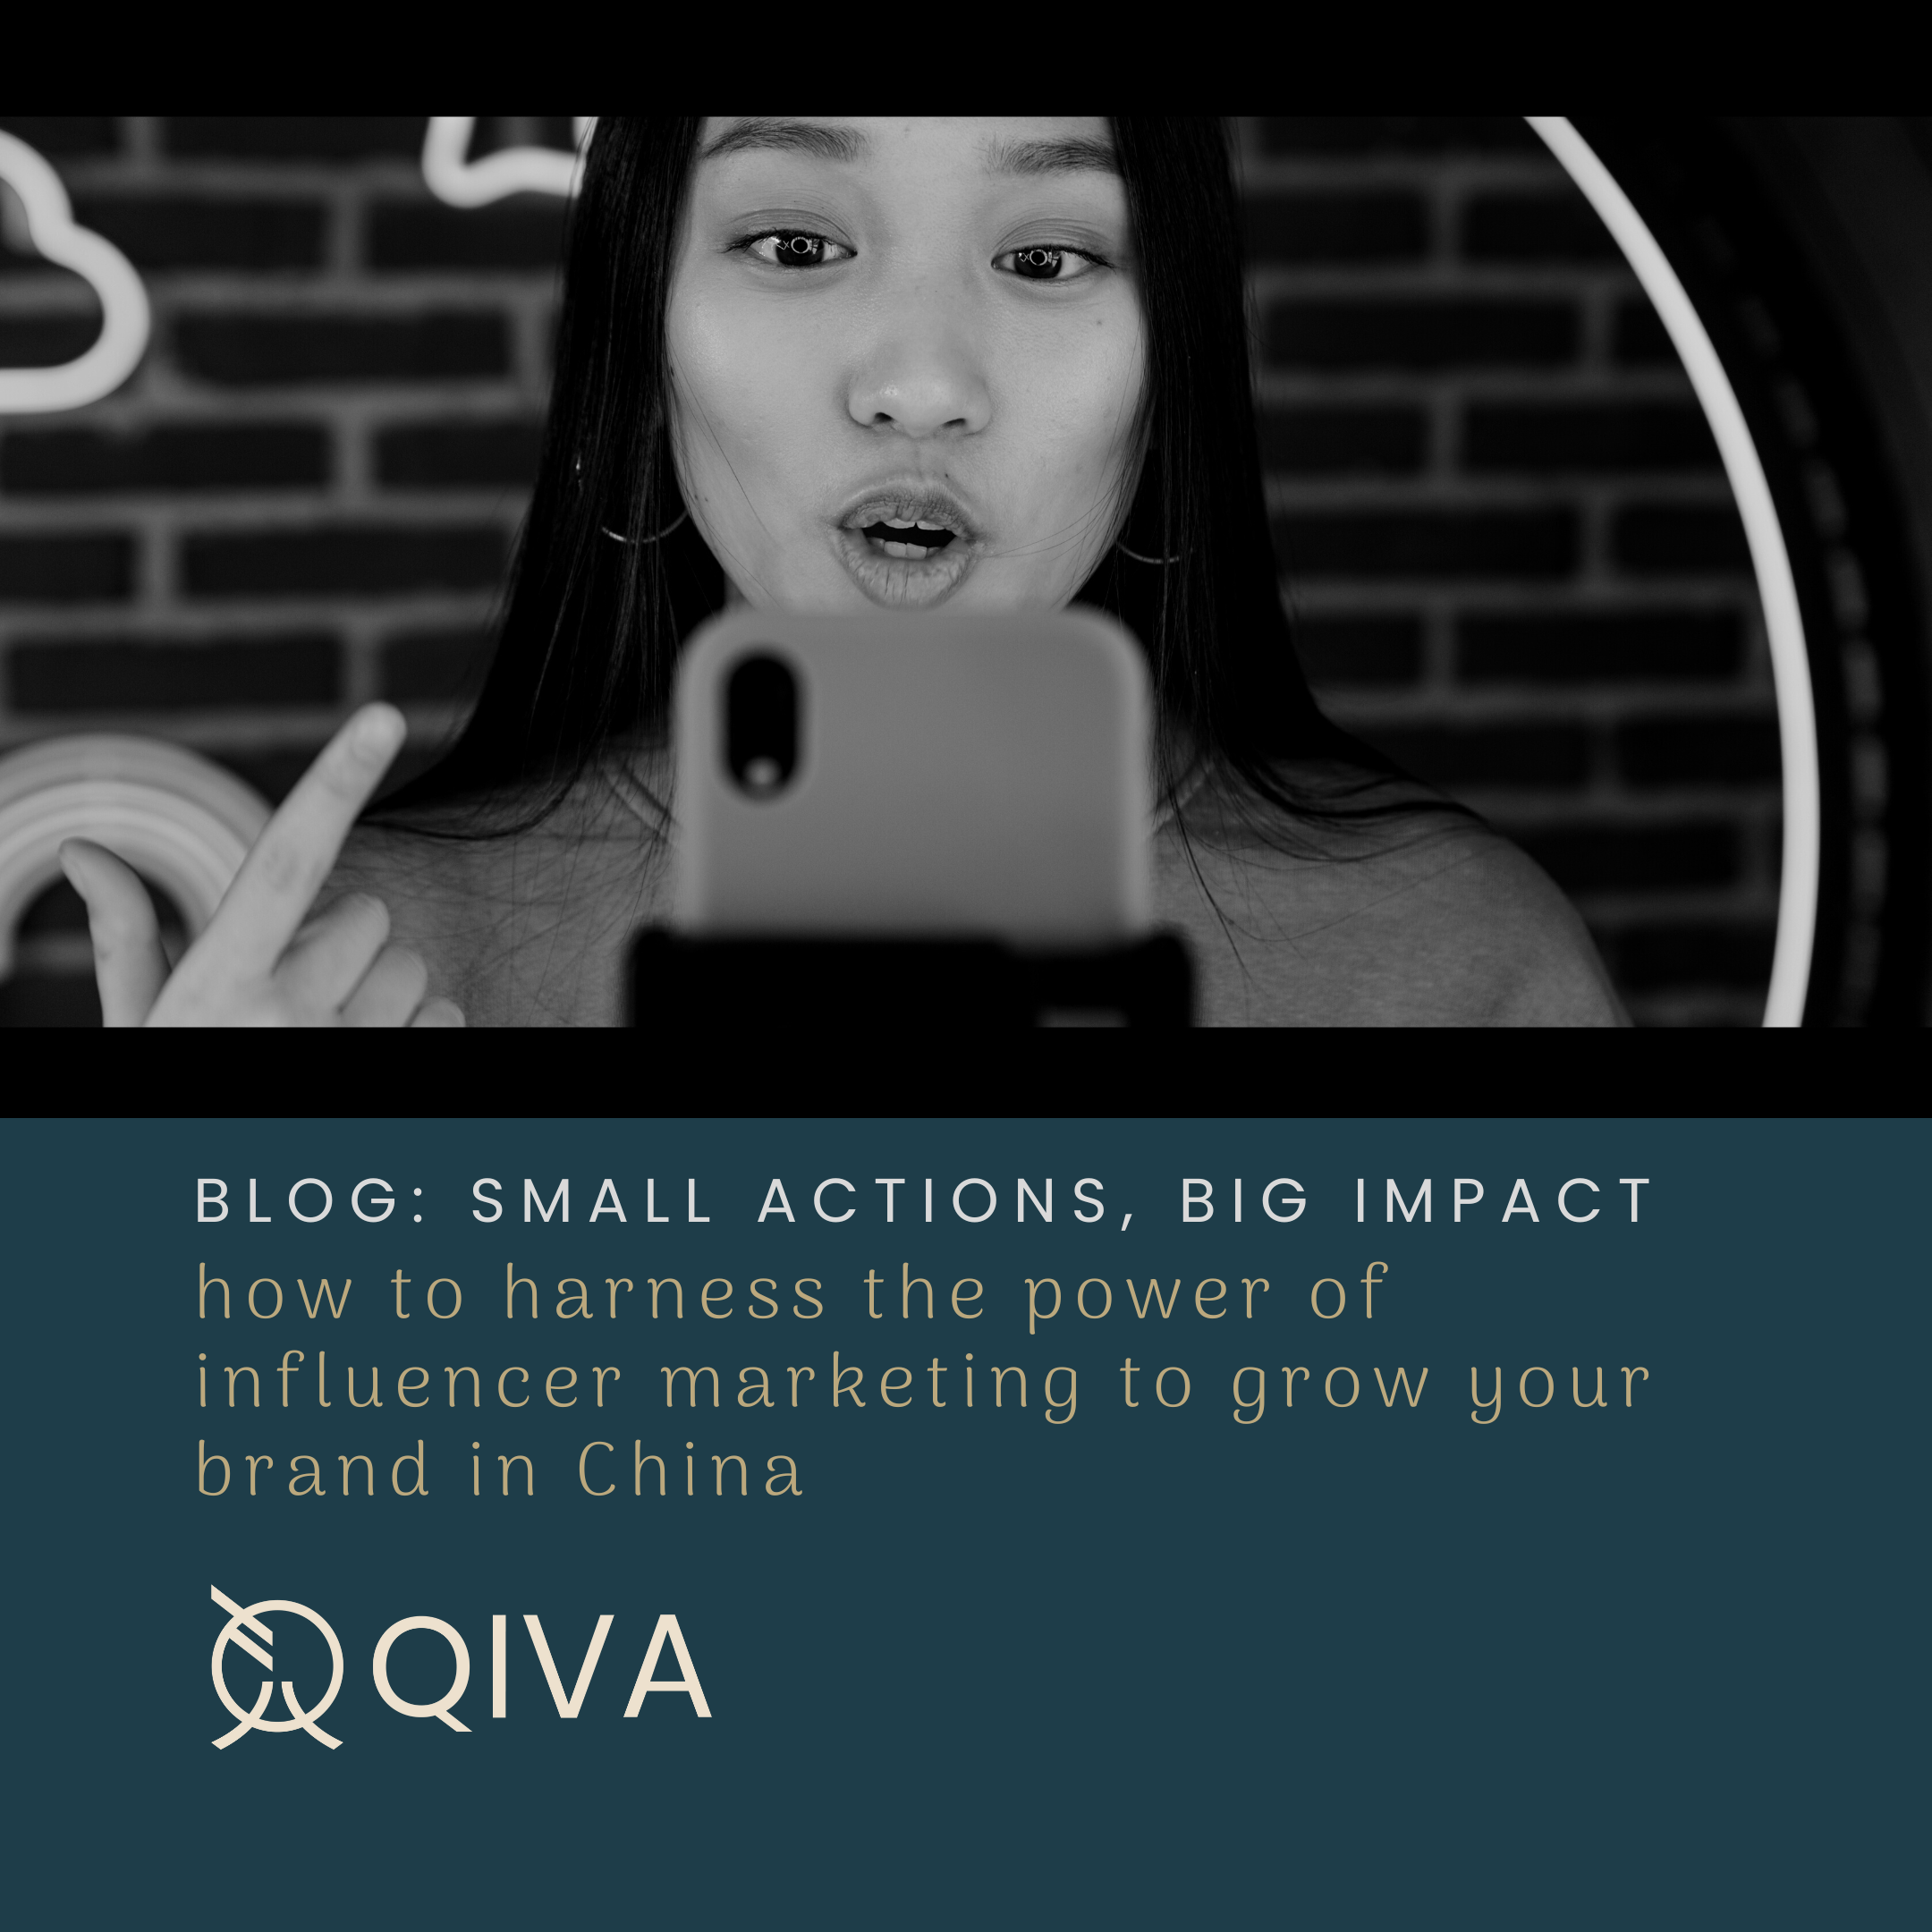 Small actions, big impact - how to harness the power of influencer marketing to grow your brand in China